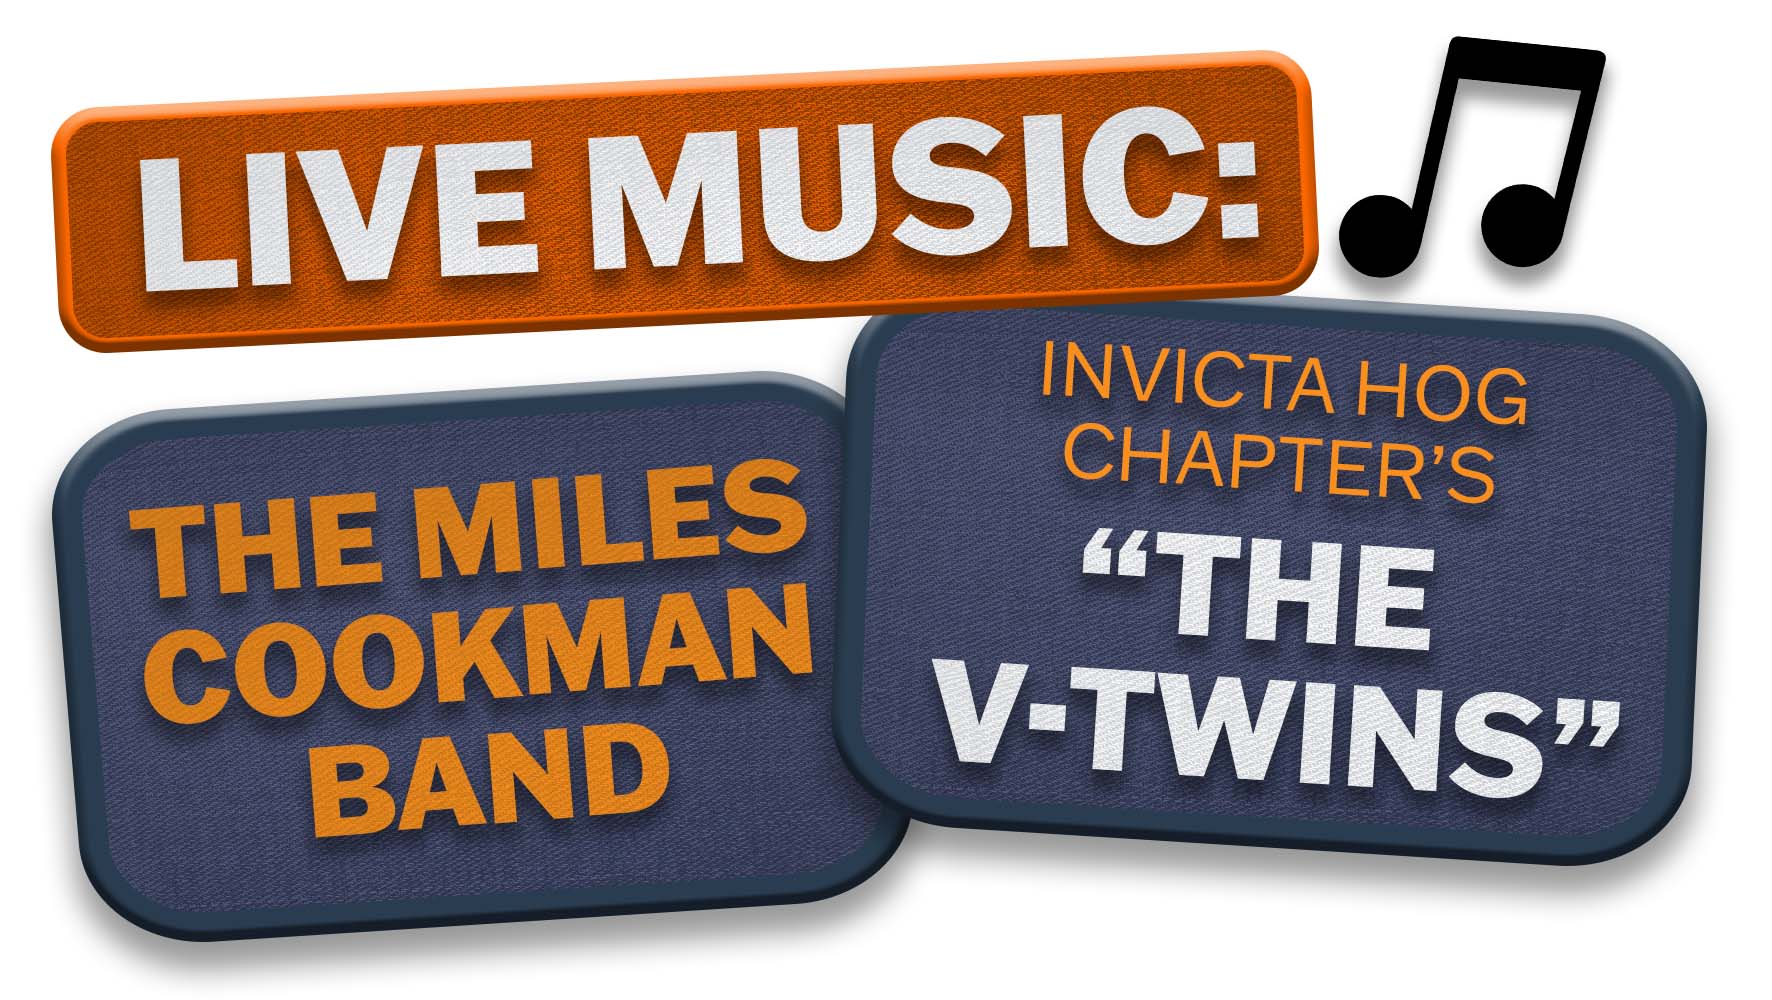 Live music from The Miles Cookman Band and the Invicta HOG Chapter's The V-Twins at Maidstone Harley-Davidson's 1st July Summer BBQ